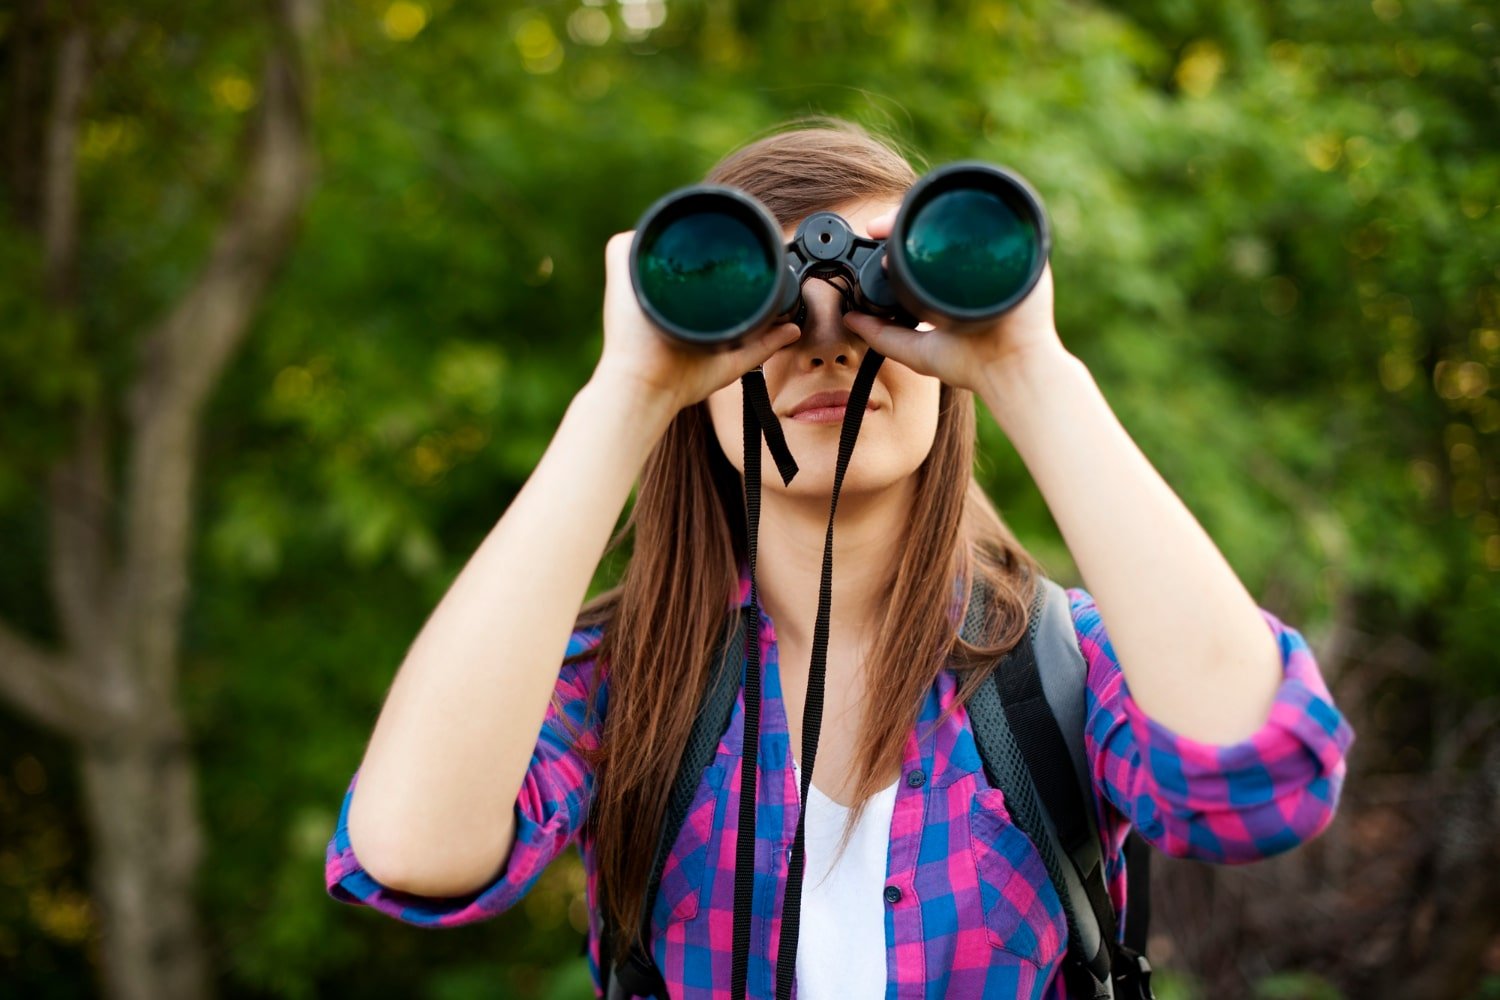 Enhance Your Outdoor Adventures With Optics Force’s High-Quality Binoculars And Scopes